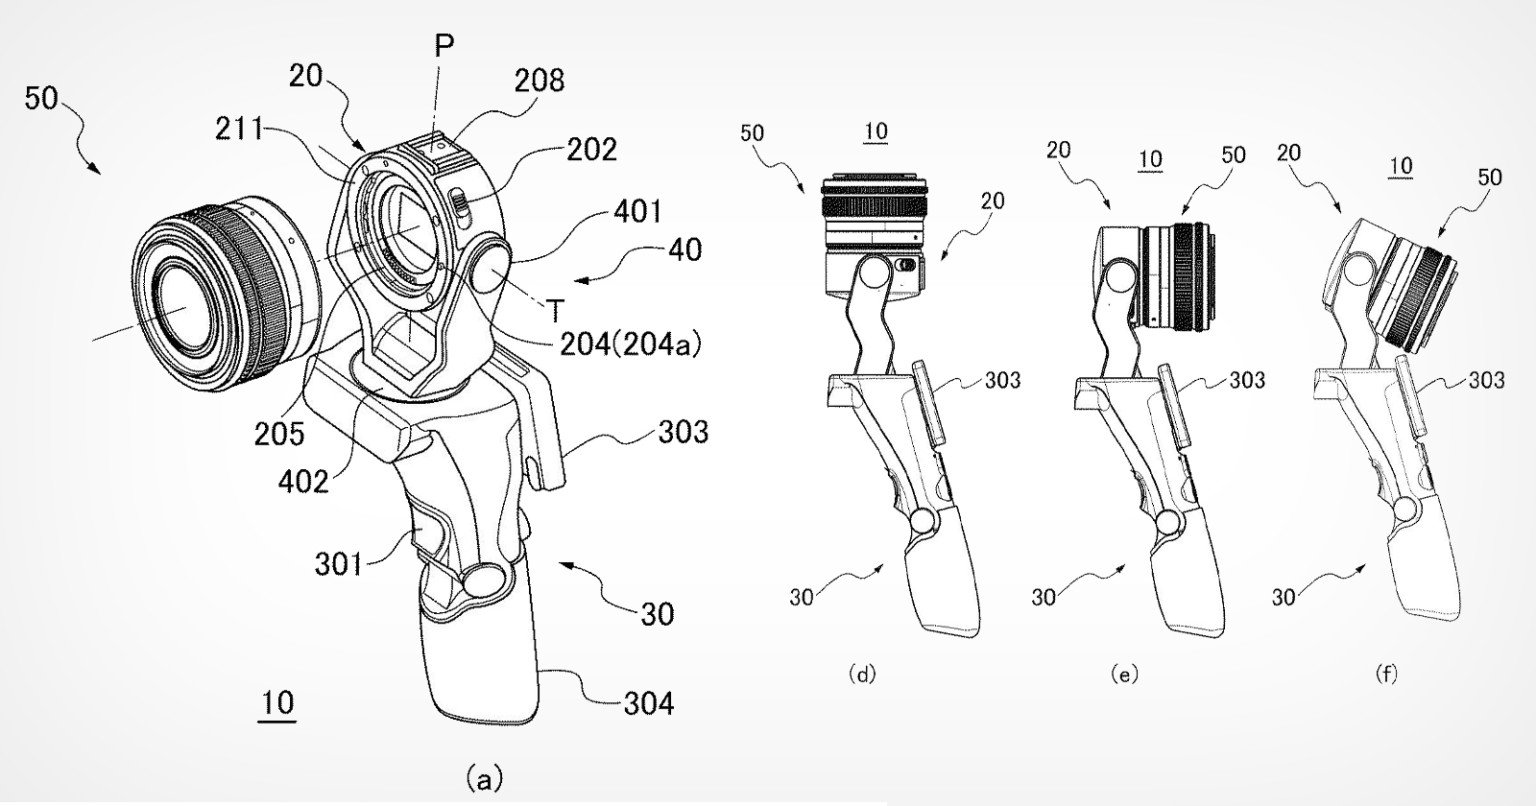 Canon might launch a DJI OSMO Pro counterpart of its own: Patent